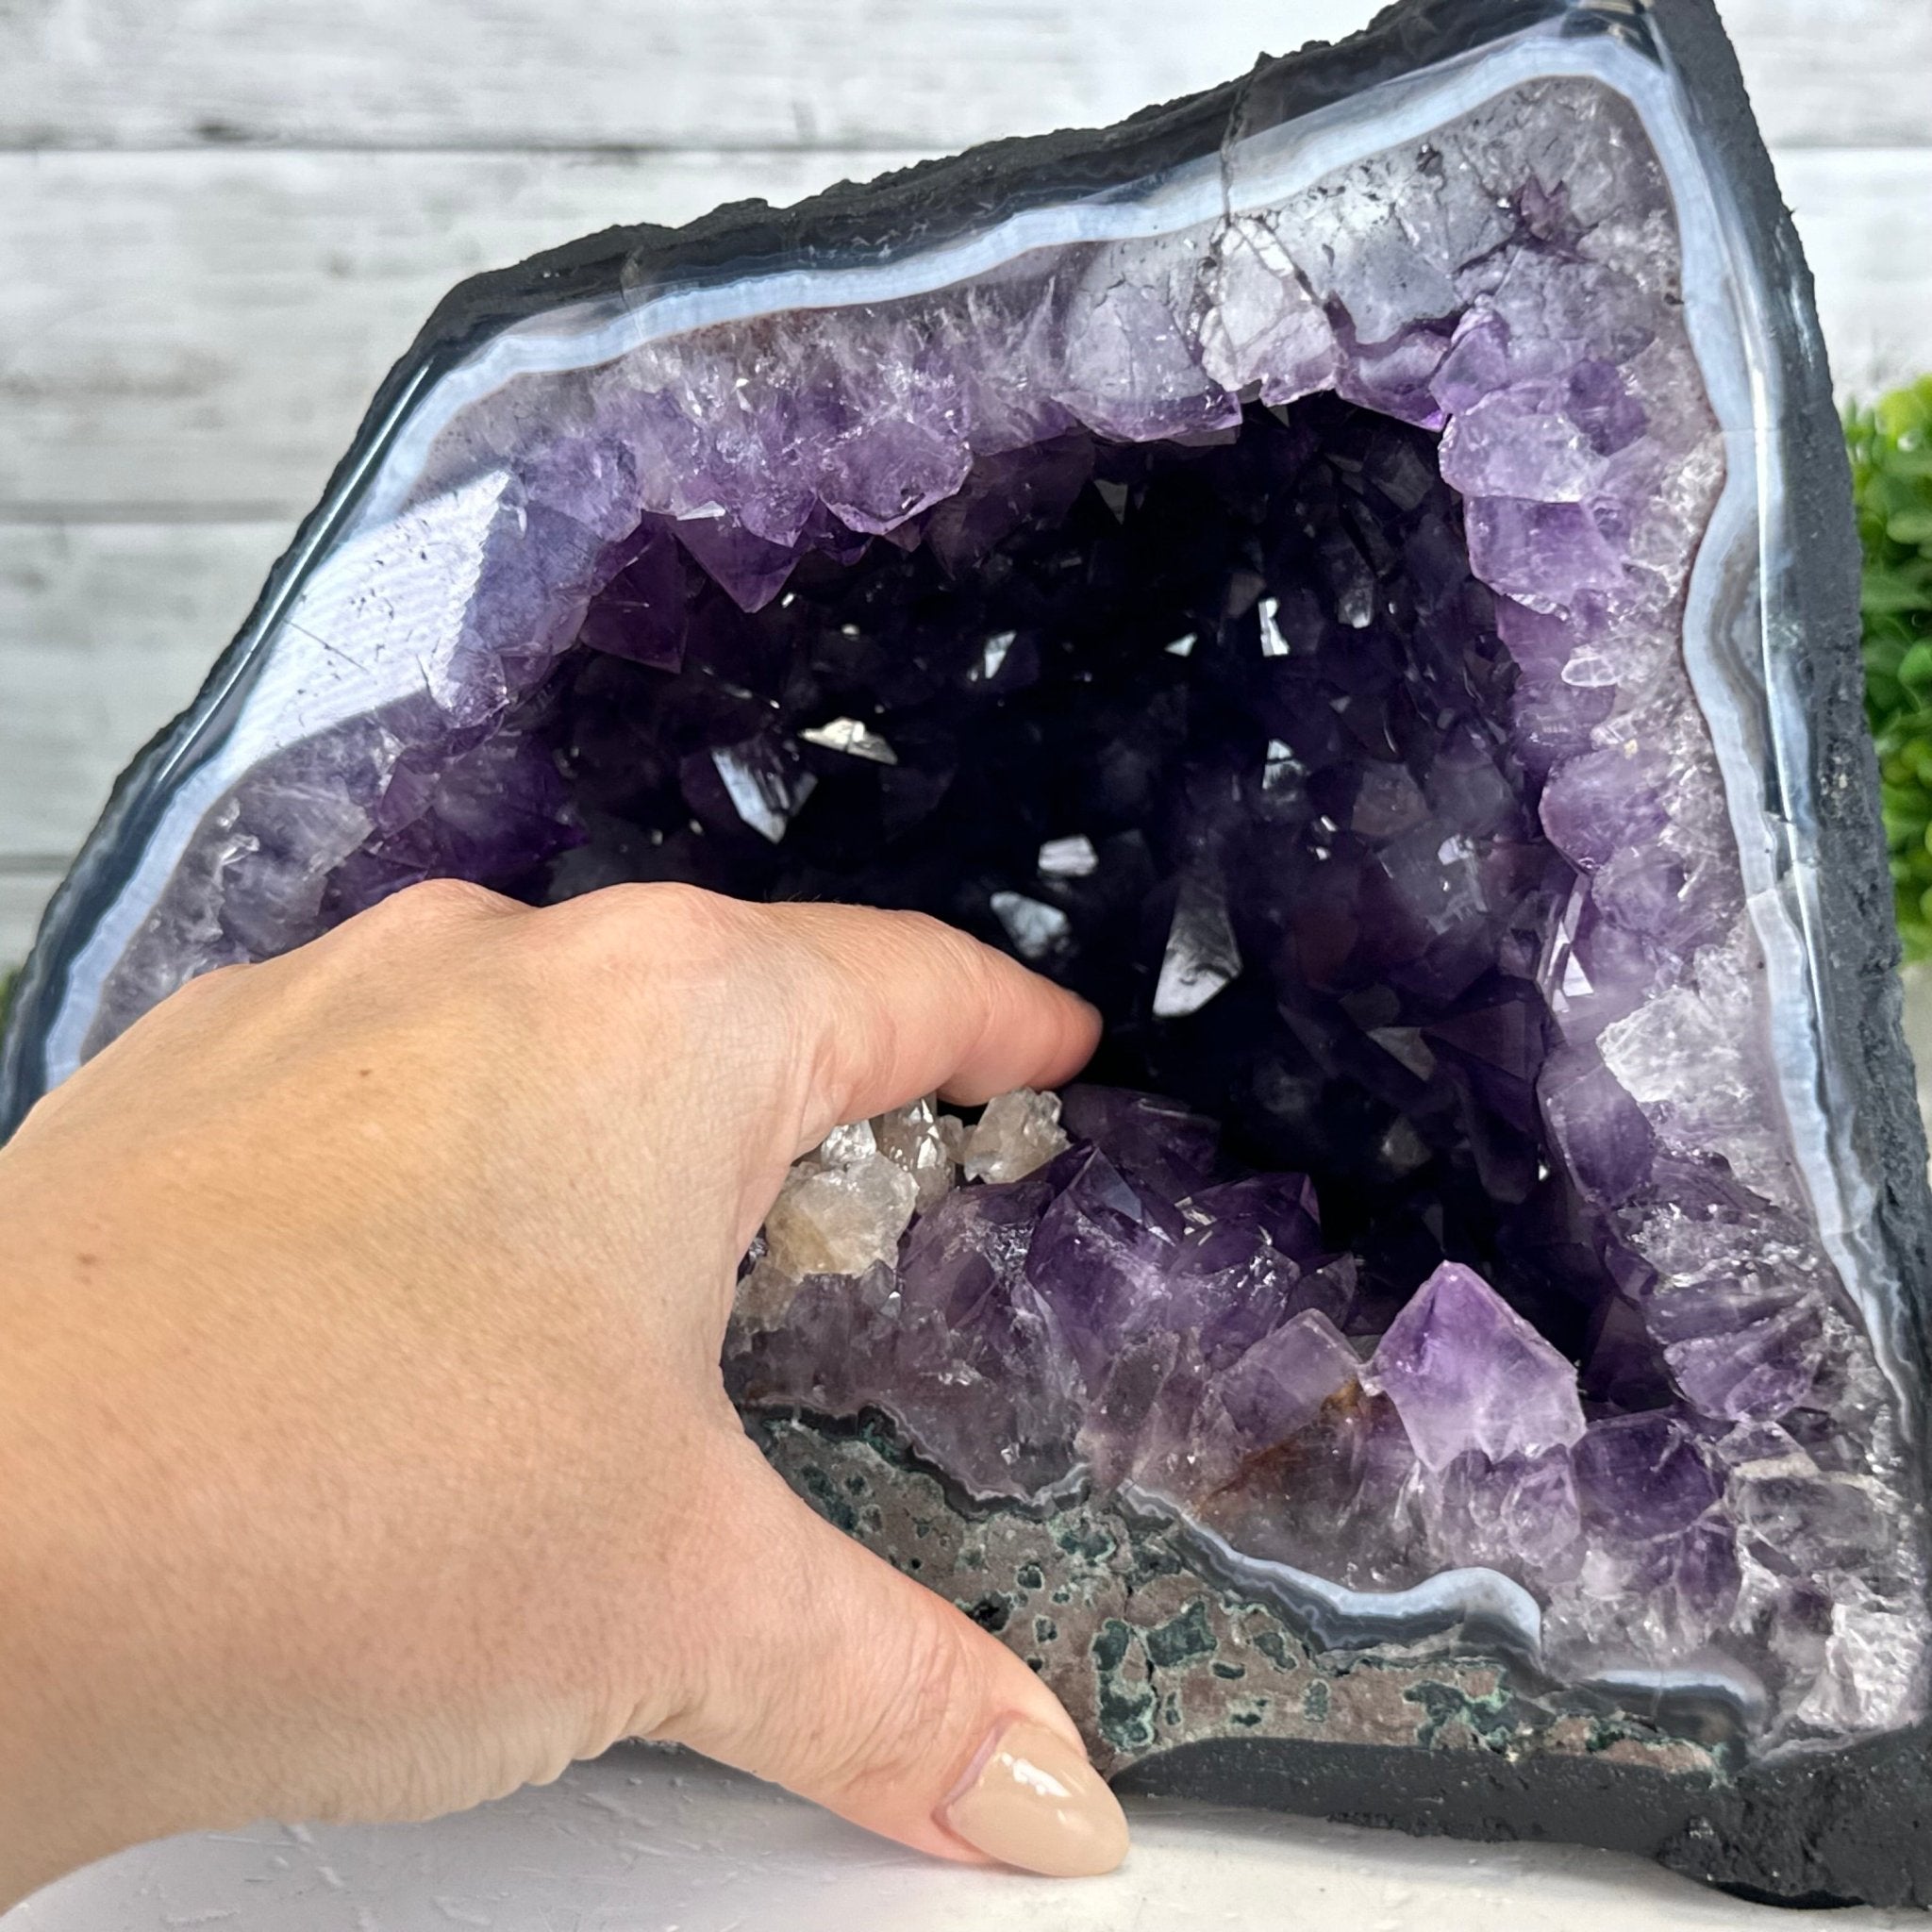 Quality Brazilian Amethyst Cathedral, 15.1 lbs & 7.4" Tall, #5601 - 1365 - Brazil GemsBrazil GemsQuality Brazilian Amethyst Cathedral, 15.1 lbs & 7.4" Tall, #5601 - 1365Cathedrals5601 - 1365